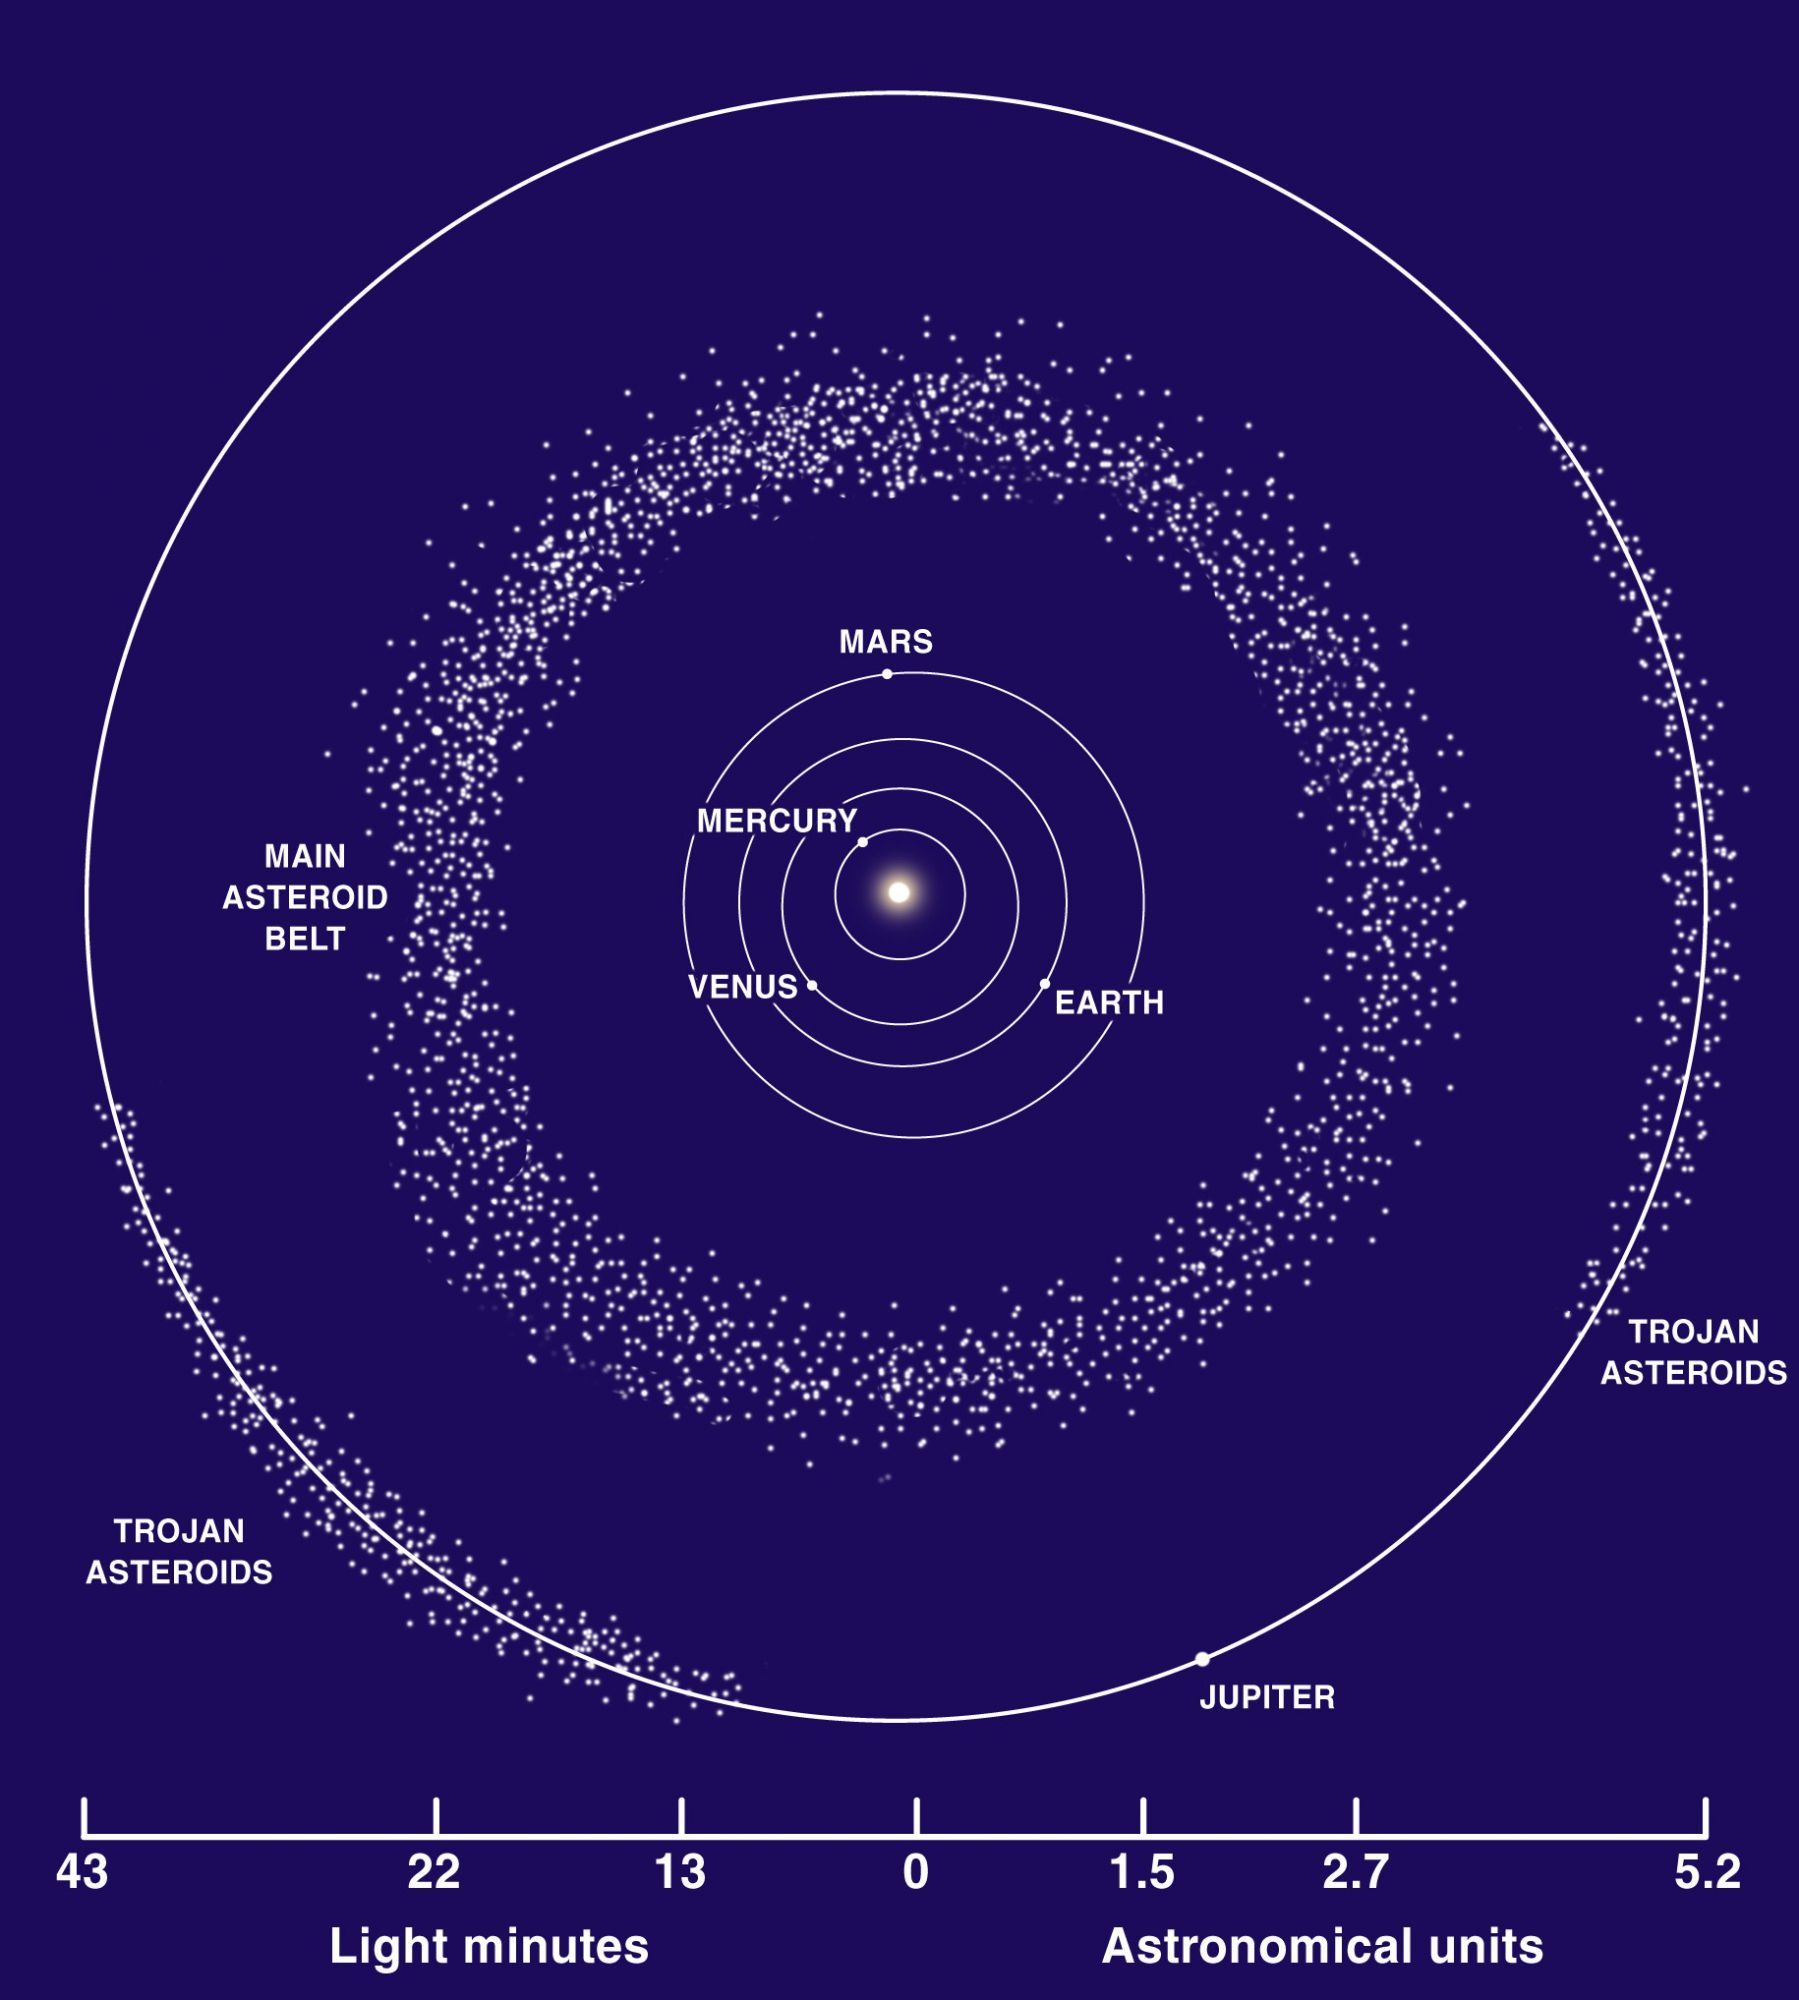 The asteroid belt between Mars and Jupiter. Credits DR.